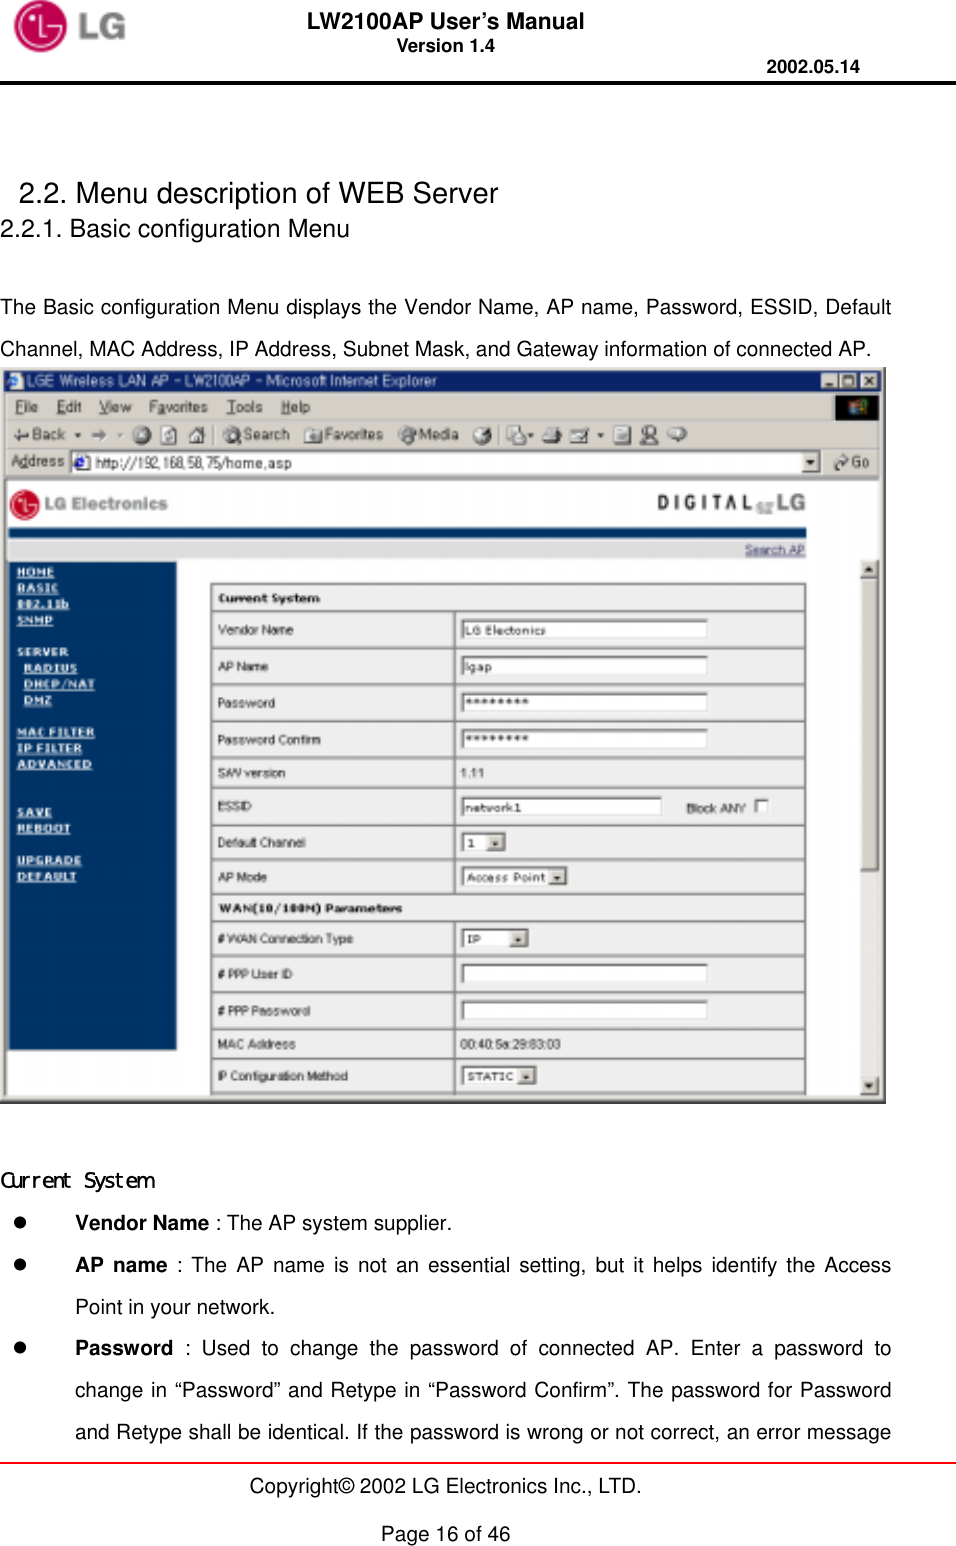 LW2100AP User’s Manual Version 1.4 2002.05.14   Copyright© 2002 LG Electronics Inc., LTD.  Page 16 of 46   2.2. Menu description of WEB Server 2.2.1. Basic configuration Menu  The Basic configuration Menu displays the Vendor Name, AP name, Password, ESSID, Default Channel, MAC Address, IP Address, Subnet Mask, and Gateway information of connected AP.   Current System   Vendor Name : The AP system supplier.   AP name : The AP name is not an essential setting, but it helps identify the Access Point in your network.     Password : Used to change the password of connected AP. Enter a password to change in “Password” and Retype in “Password Confirm”. The password for Password and Retype shall be identical. If the password is wrong or not correct, an error message 